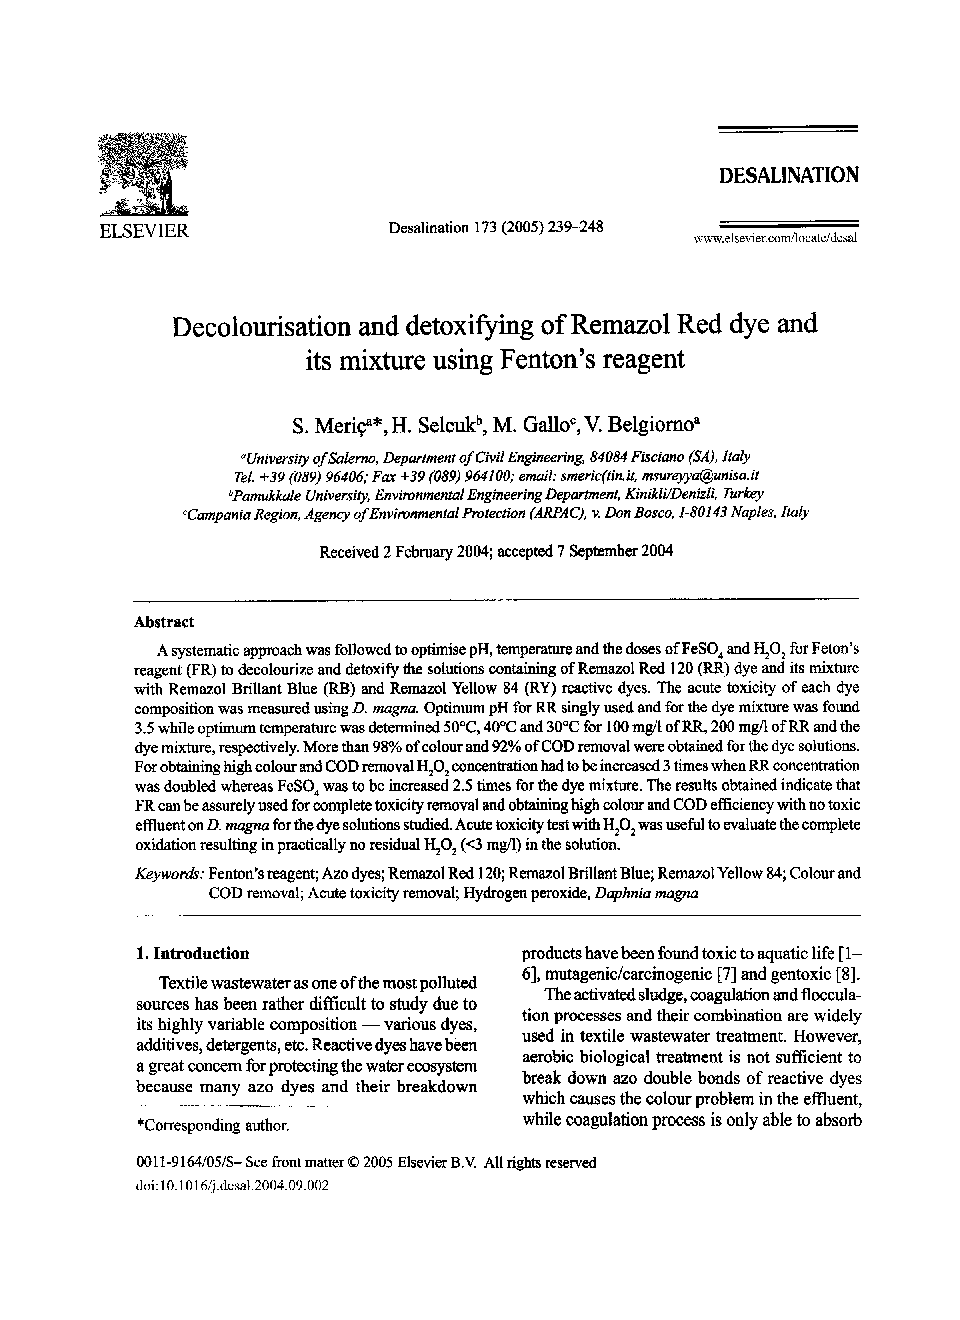 Decolourisation and detoxifying of Remazol Red dye and its mixture using Fenton's reagent